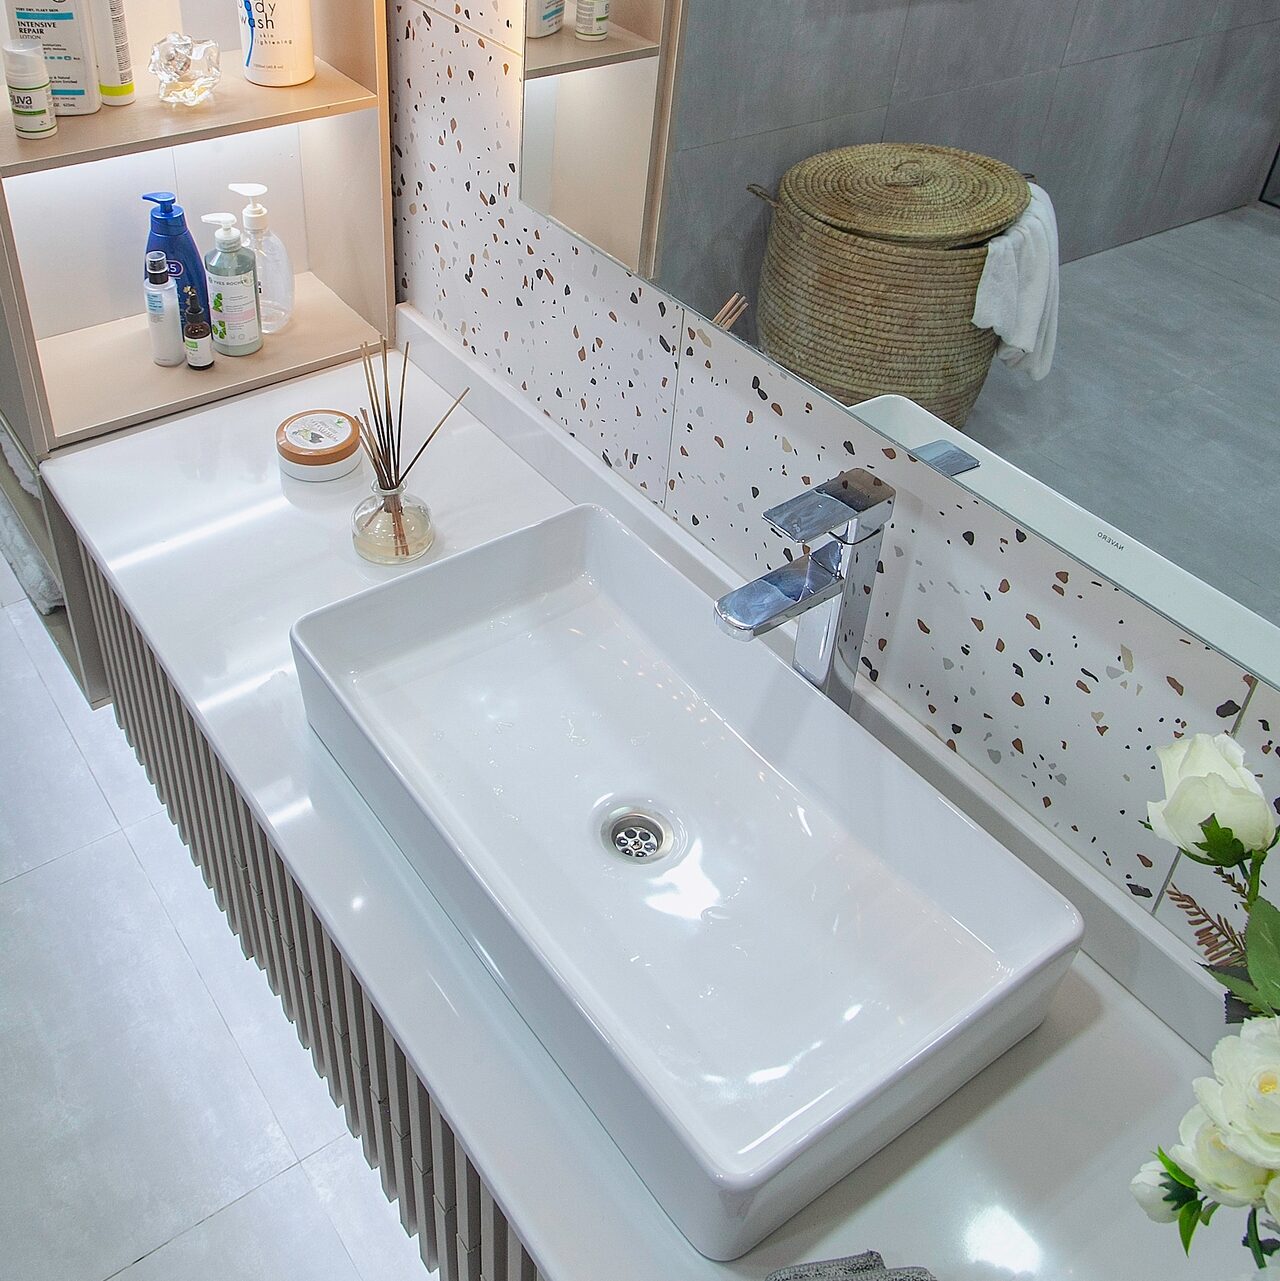 Close up of Vanity Area in this modern bathroom renovation by 2107 Atelier